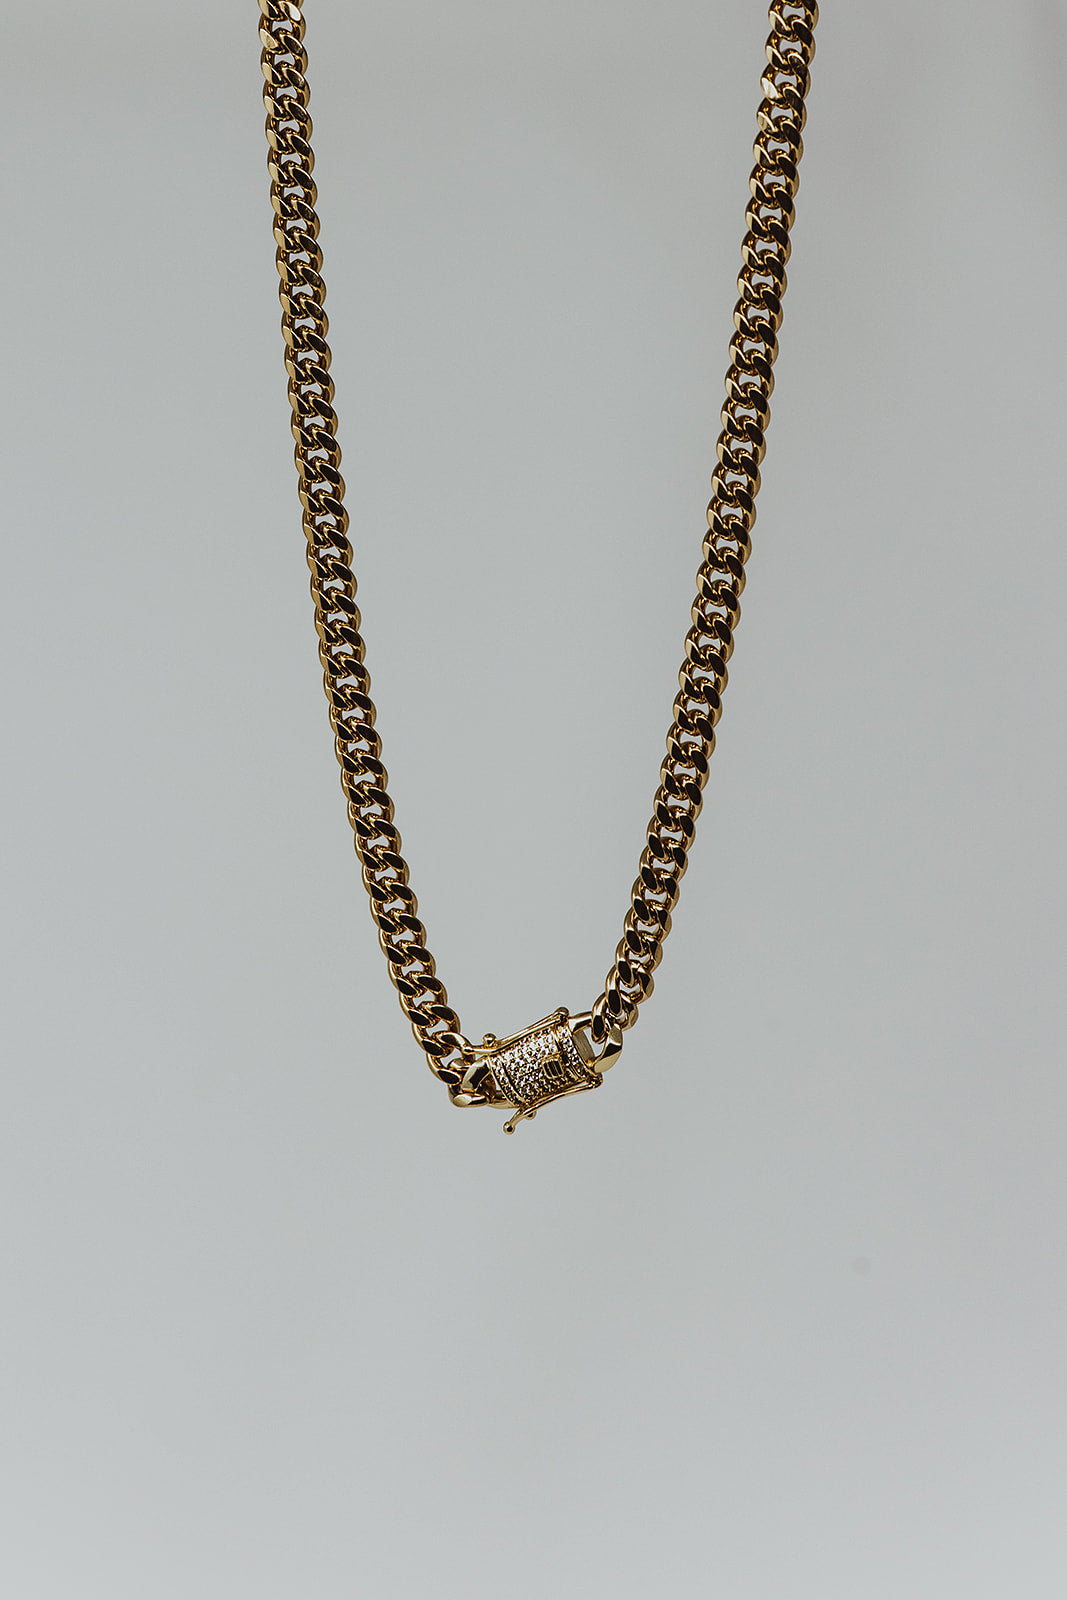 The One 316L Stainless Steel Cuban Link Chain